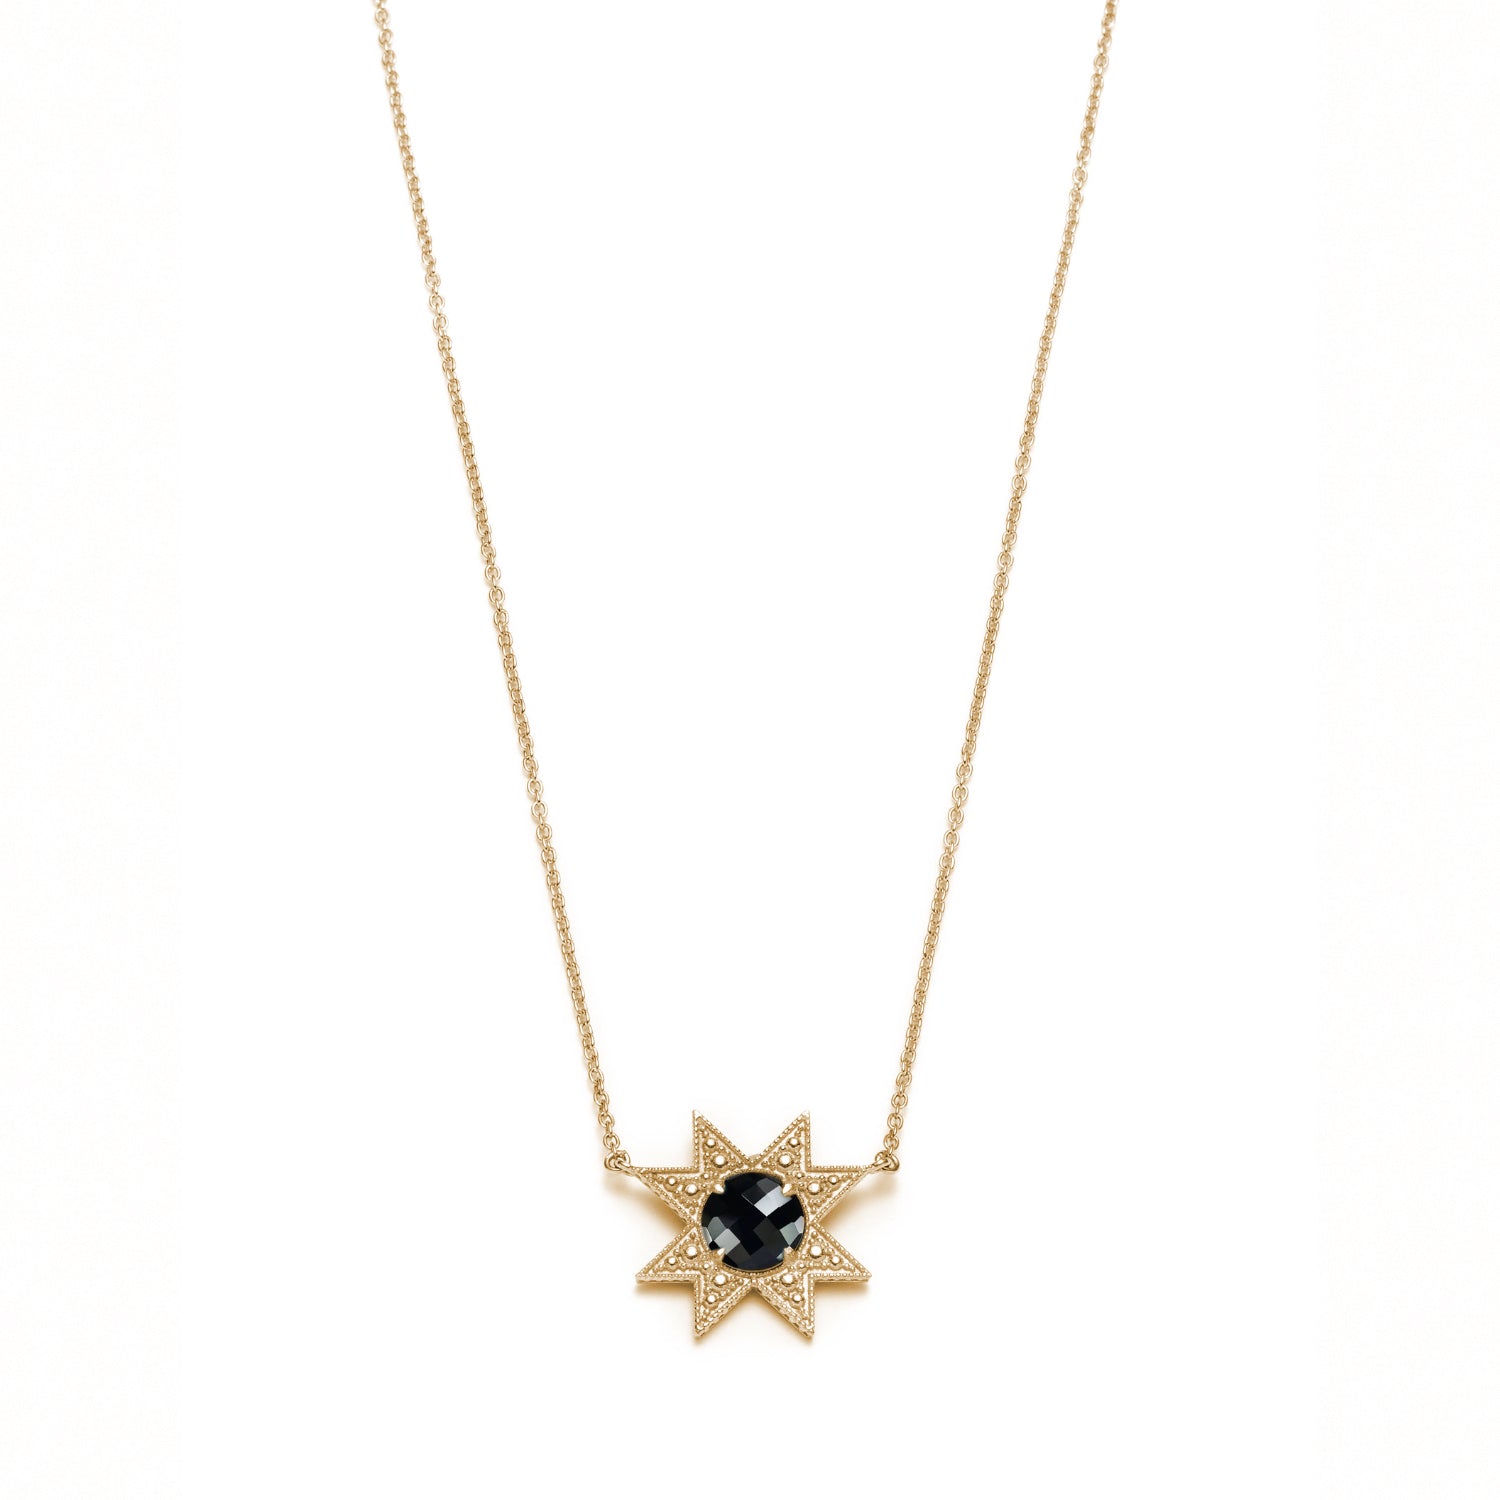 Asteri Checkerboard Cut Black Onyx Star Necklace in Yellow Gold